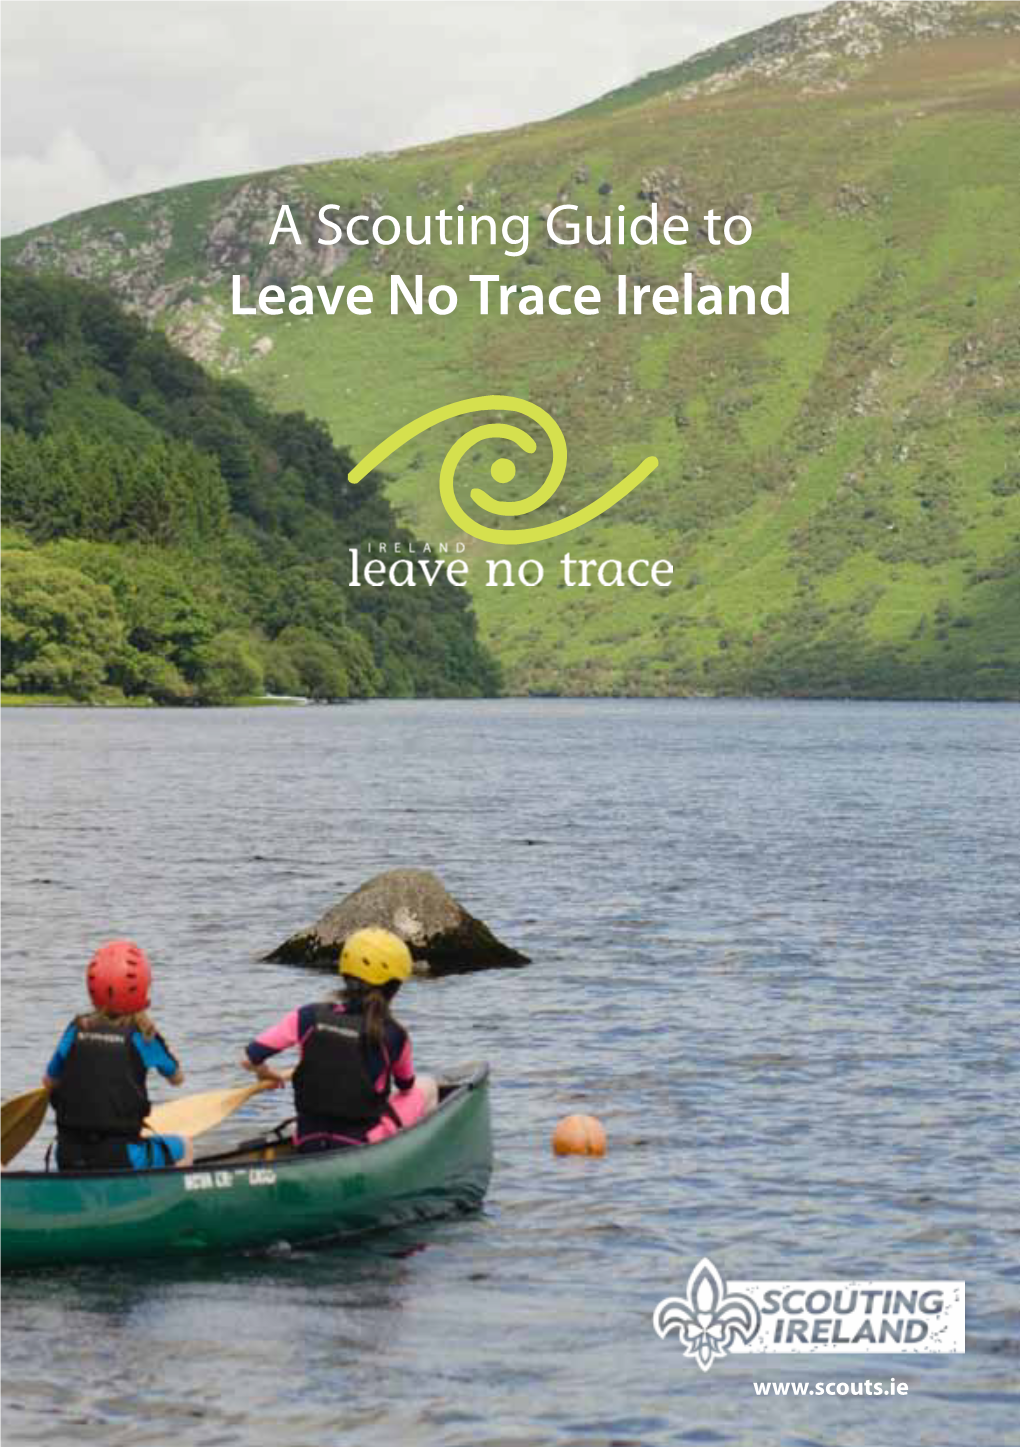 A Scouting Guide to Leave No Trace Ireland